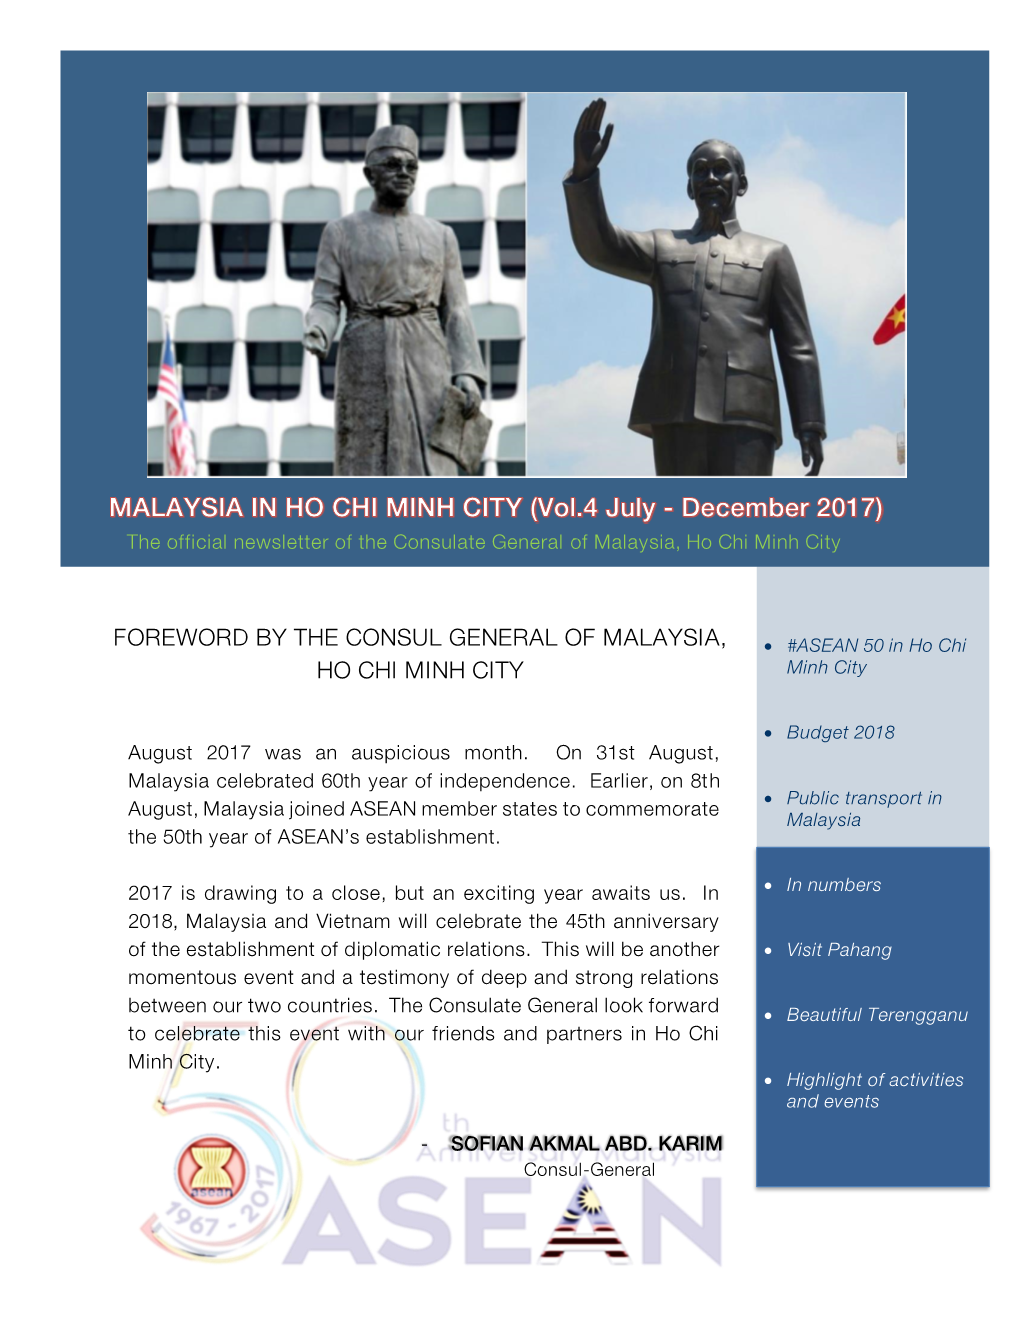 Foreword by the Consul General of Malaysia, Ho Chi